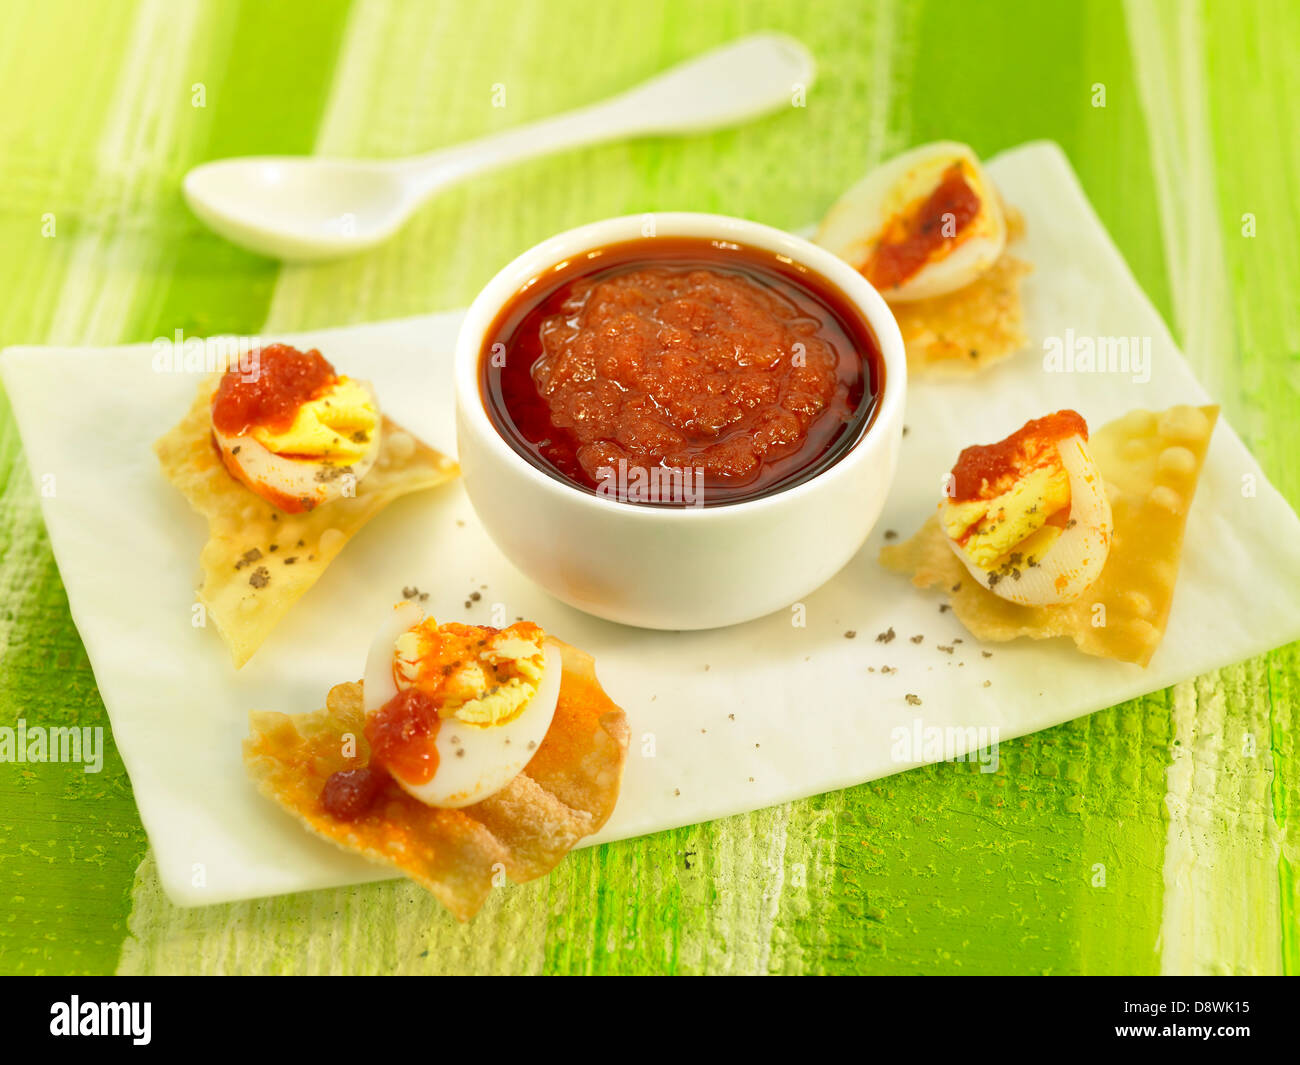 Tomato salsa with crispy egg appetizers Stock Photo